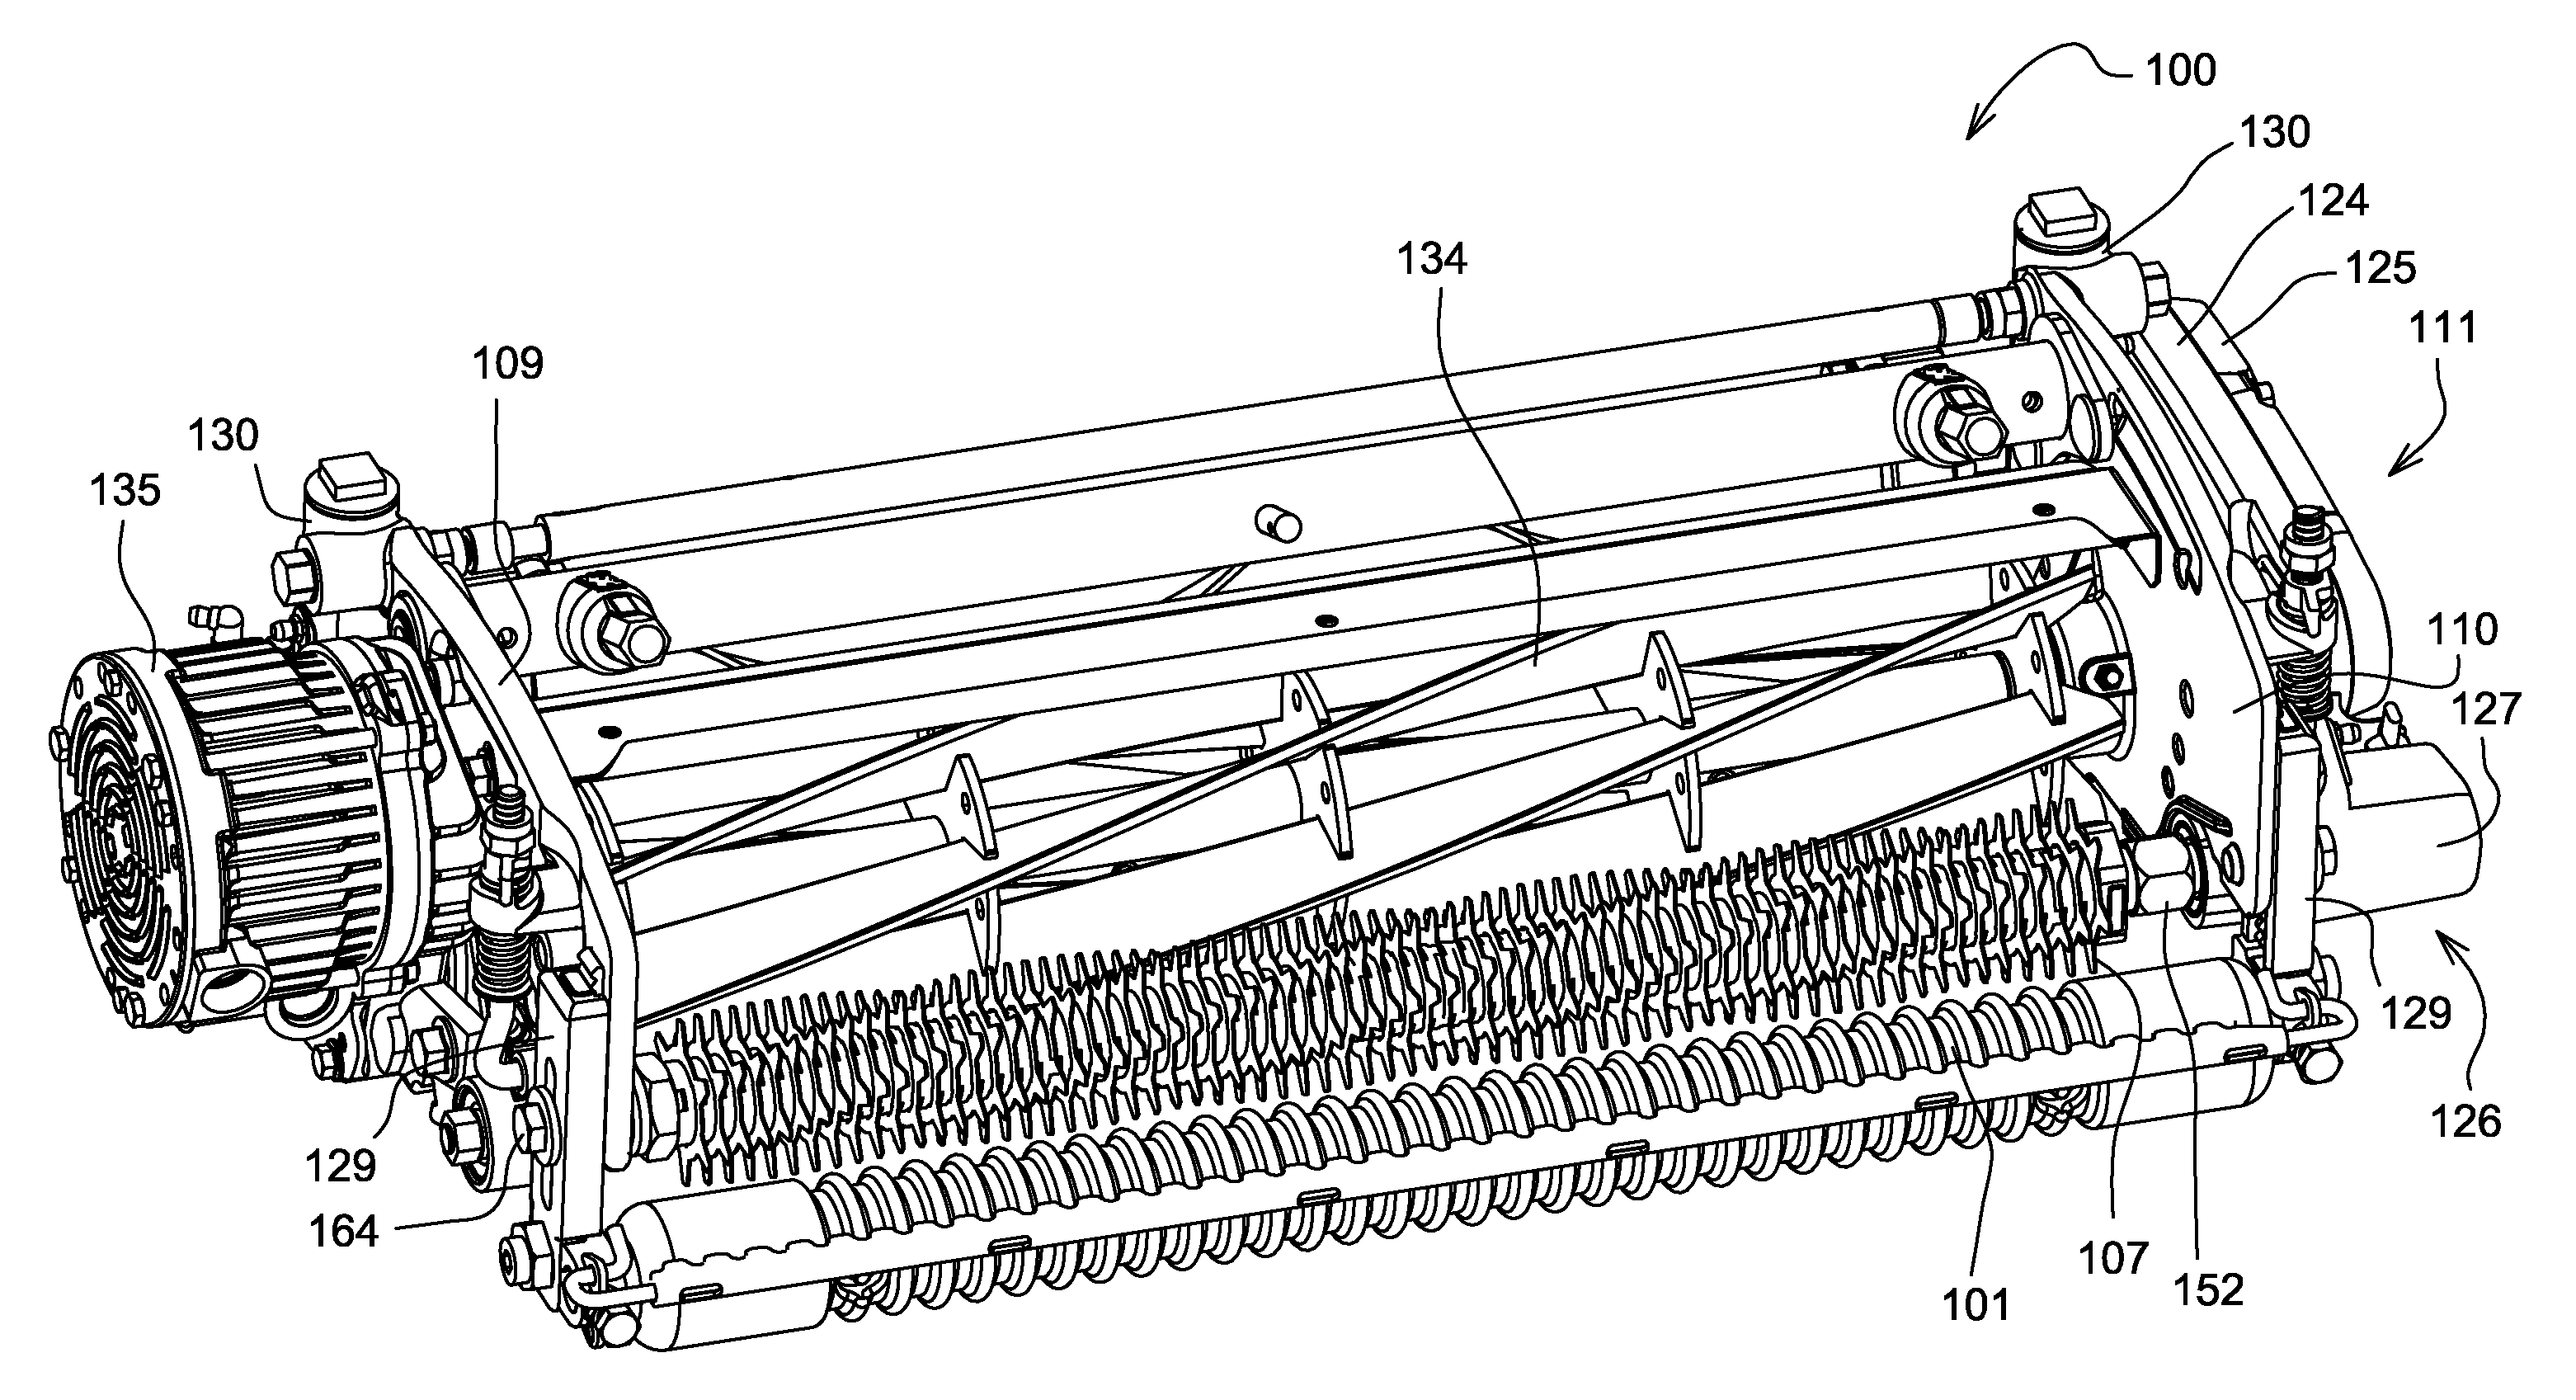 Auxiliary drive shaft connection on reel mower cutting unit